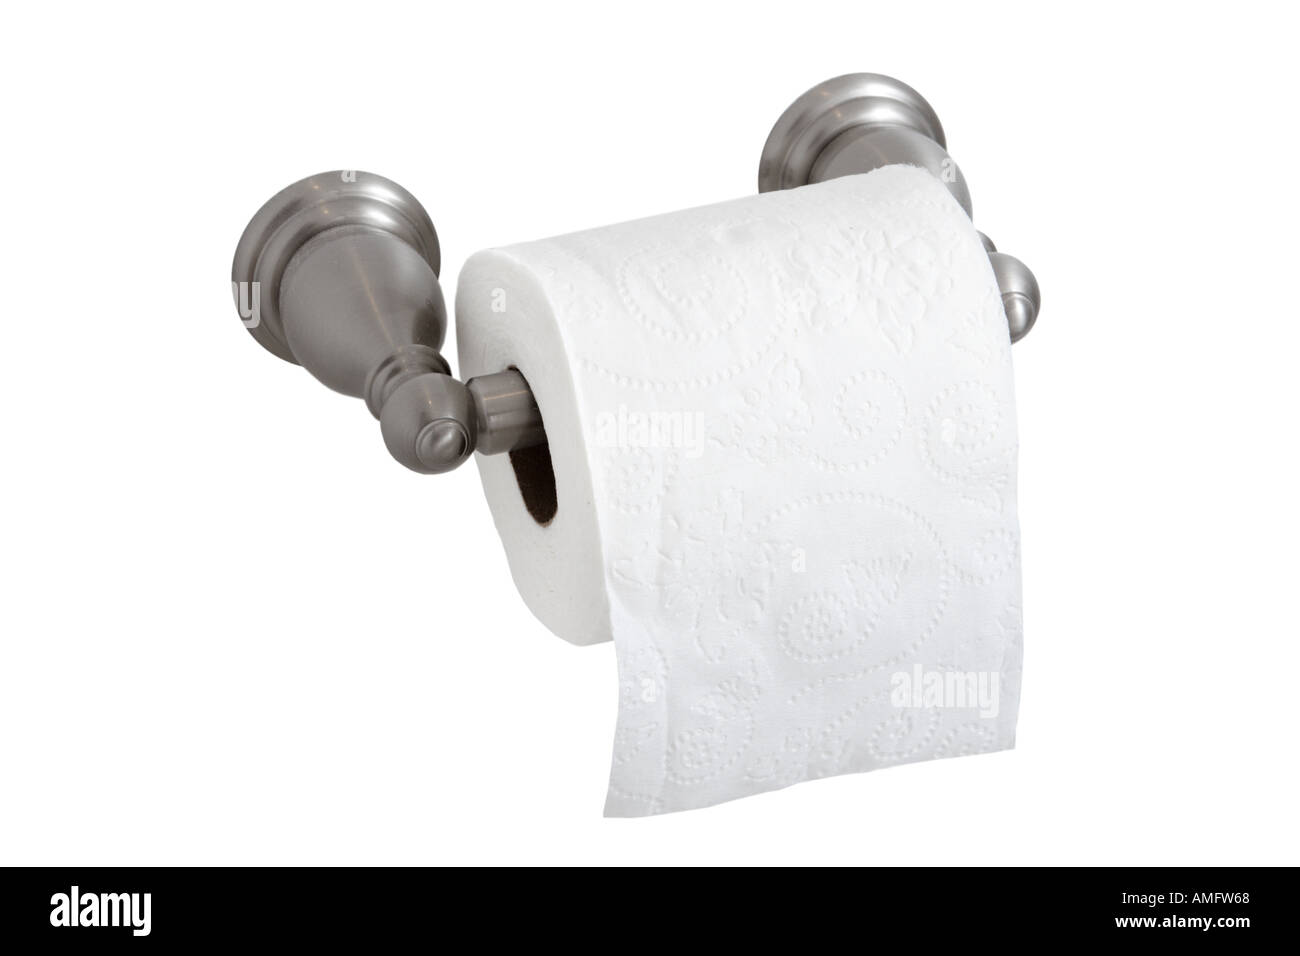 toilet paper roll and holder Stock Photo